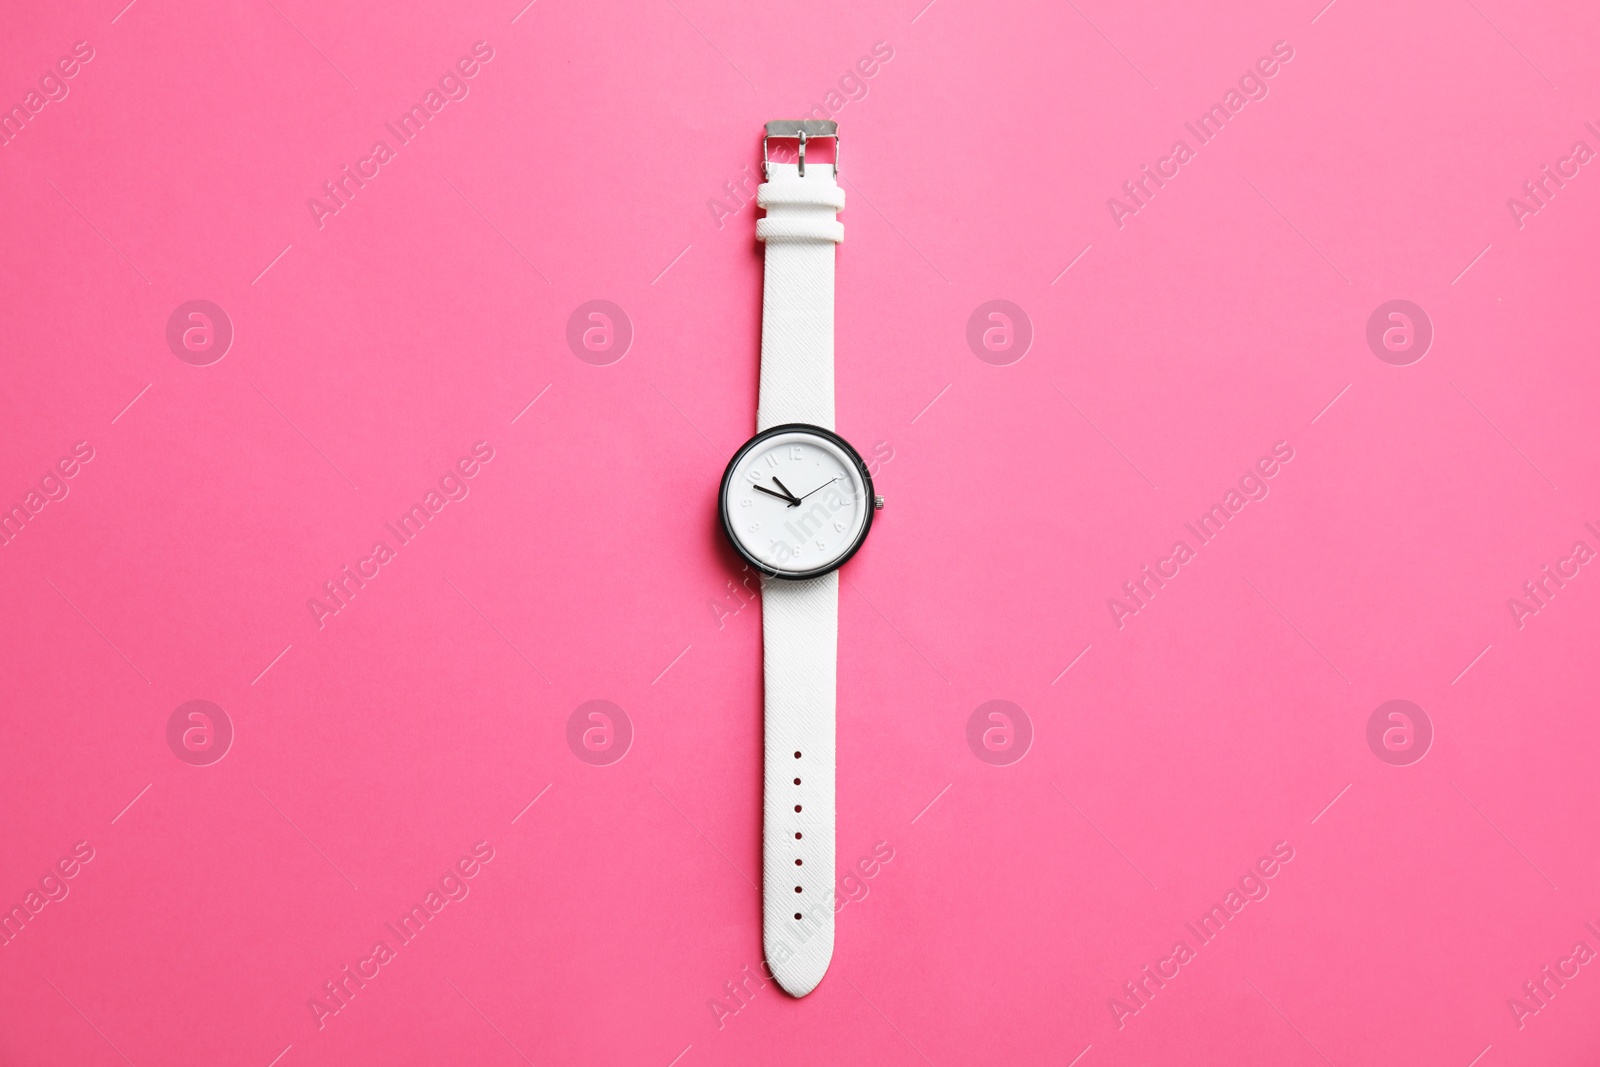 Photo of Stylish wrist watch on color background, top view. Fashion accessory